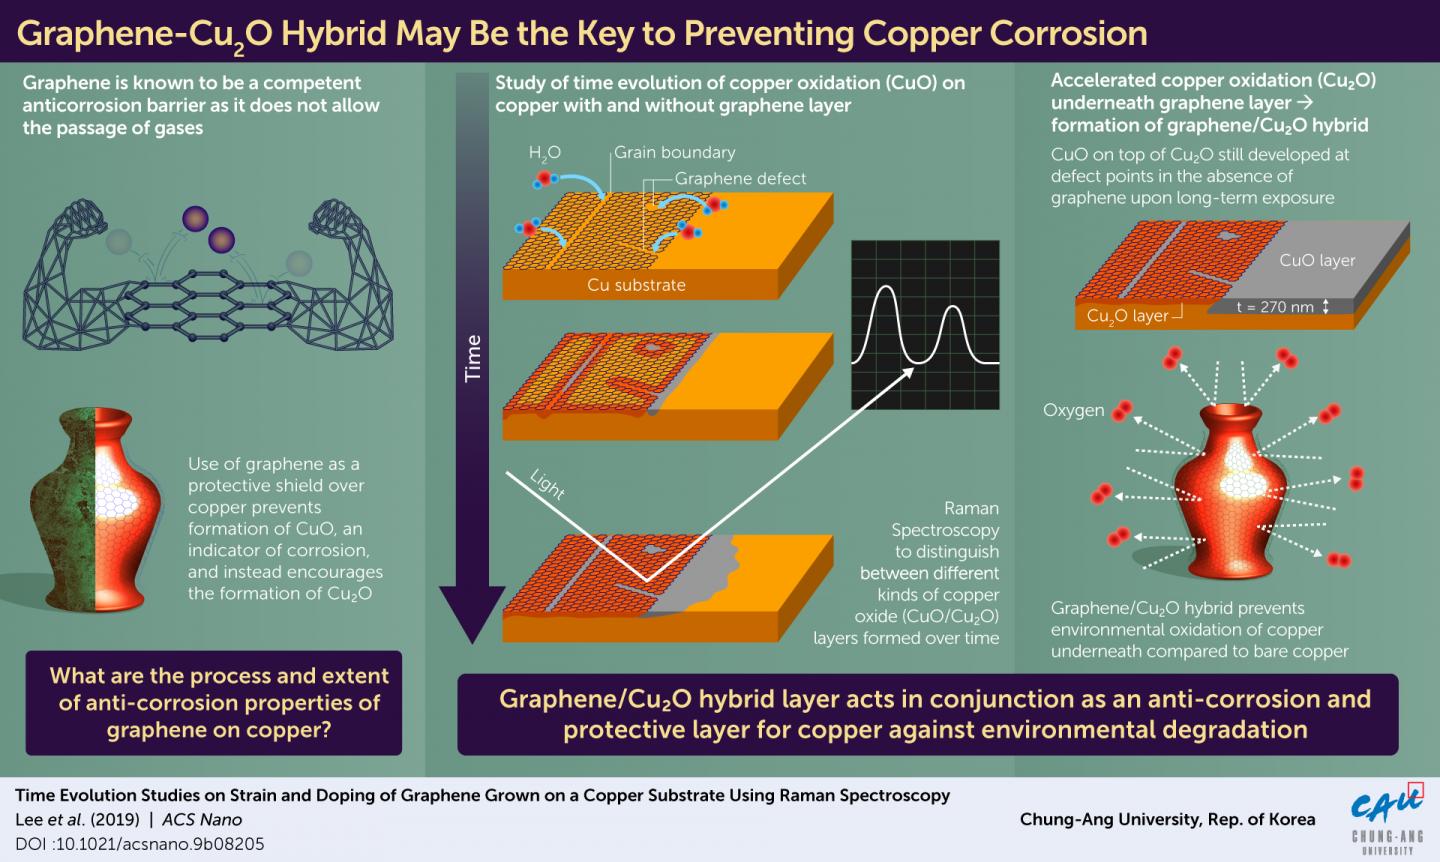 Does Graphene Cause or Prevent the Corrosion of Copper?